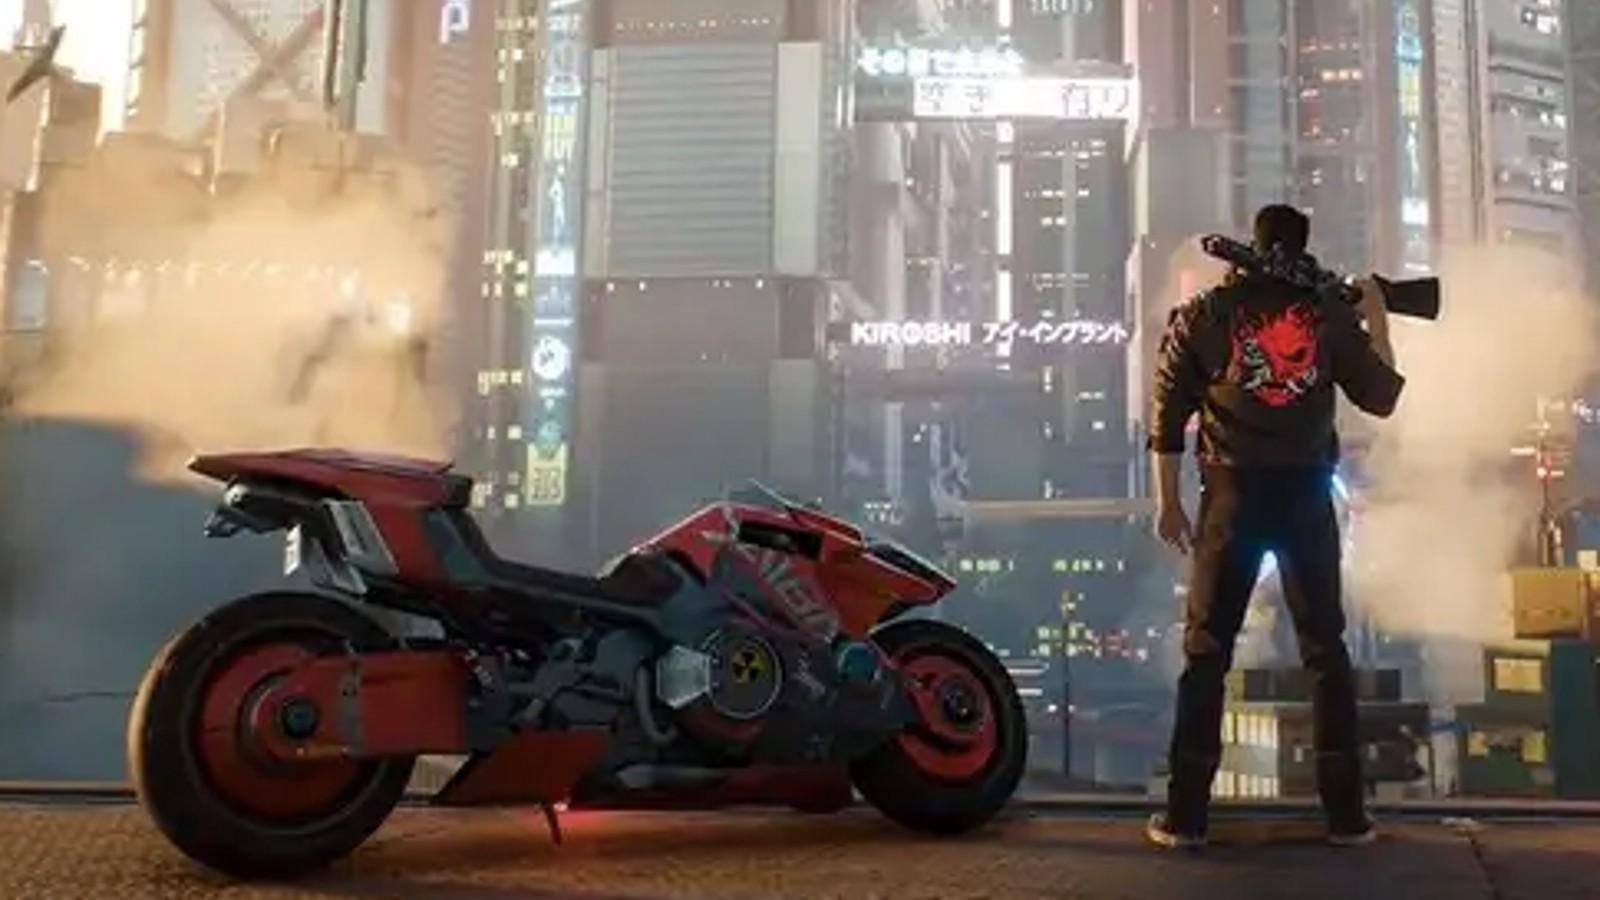 An image of V standing next to a motorcycle in Cyberpunk 2077.